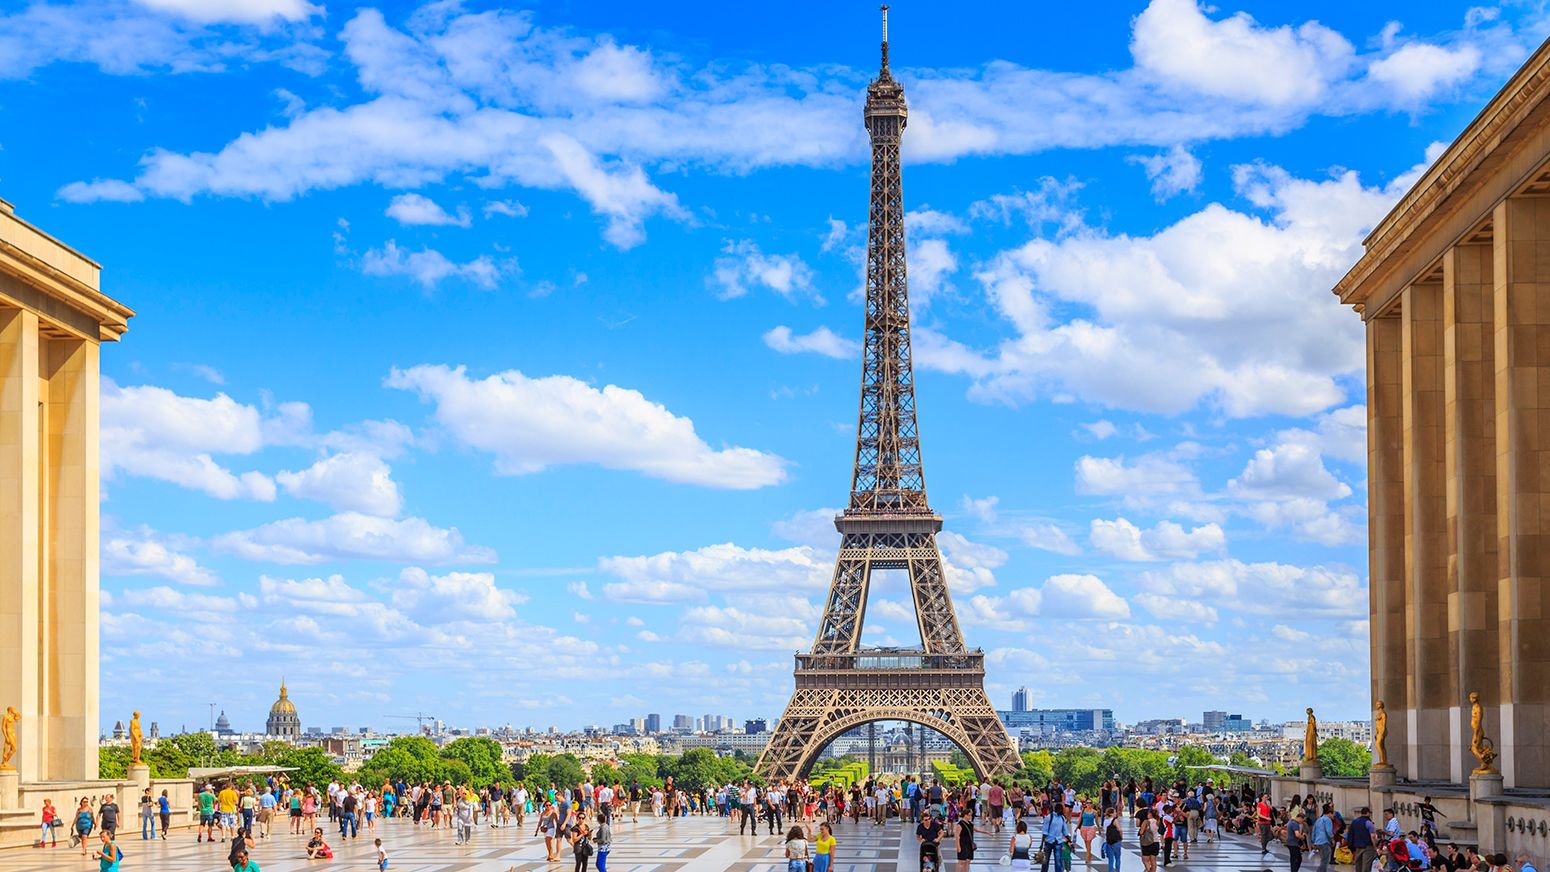 Paris is a dream destination for many Americans -- but how do people make that dream a reality?